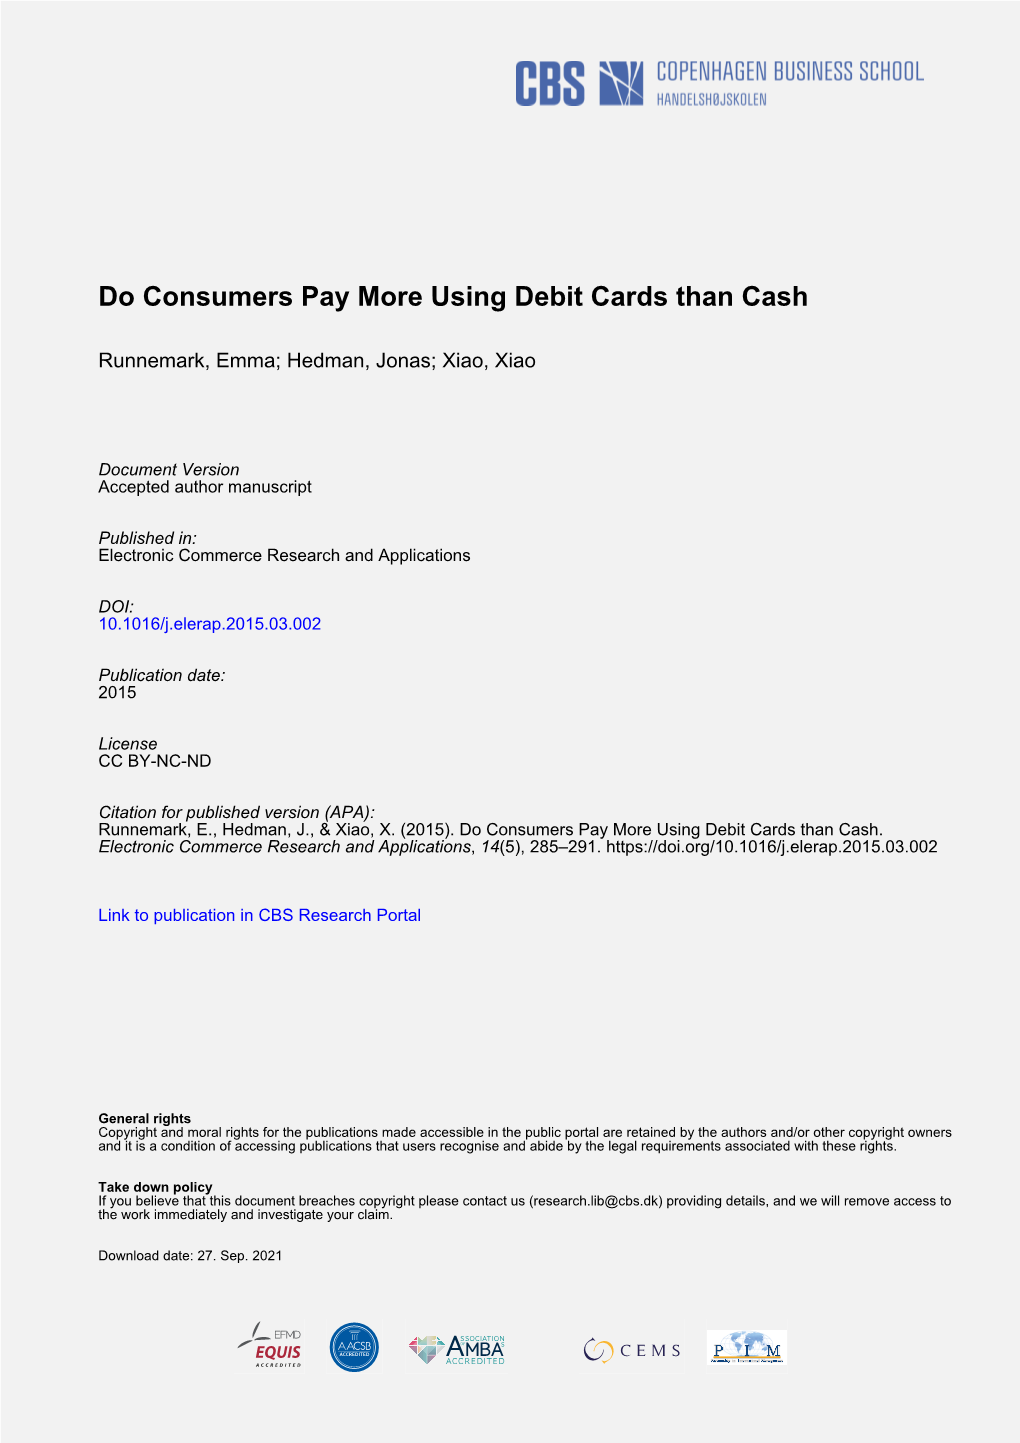 Do Consumers Pay More Using Debit Cards Than Cash